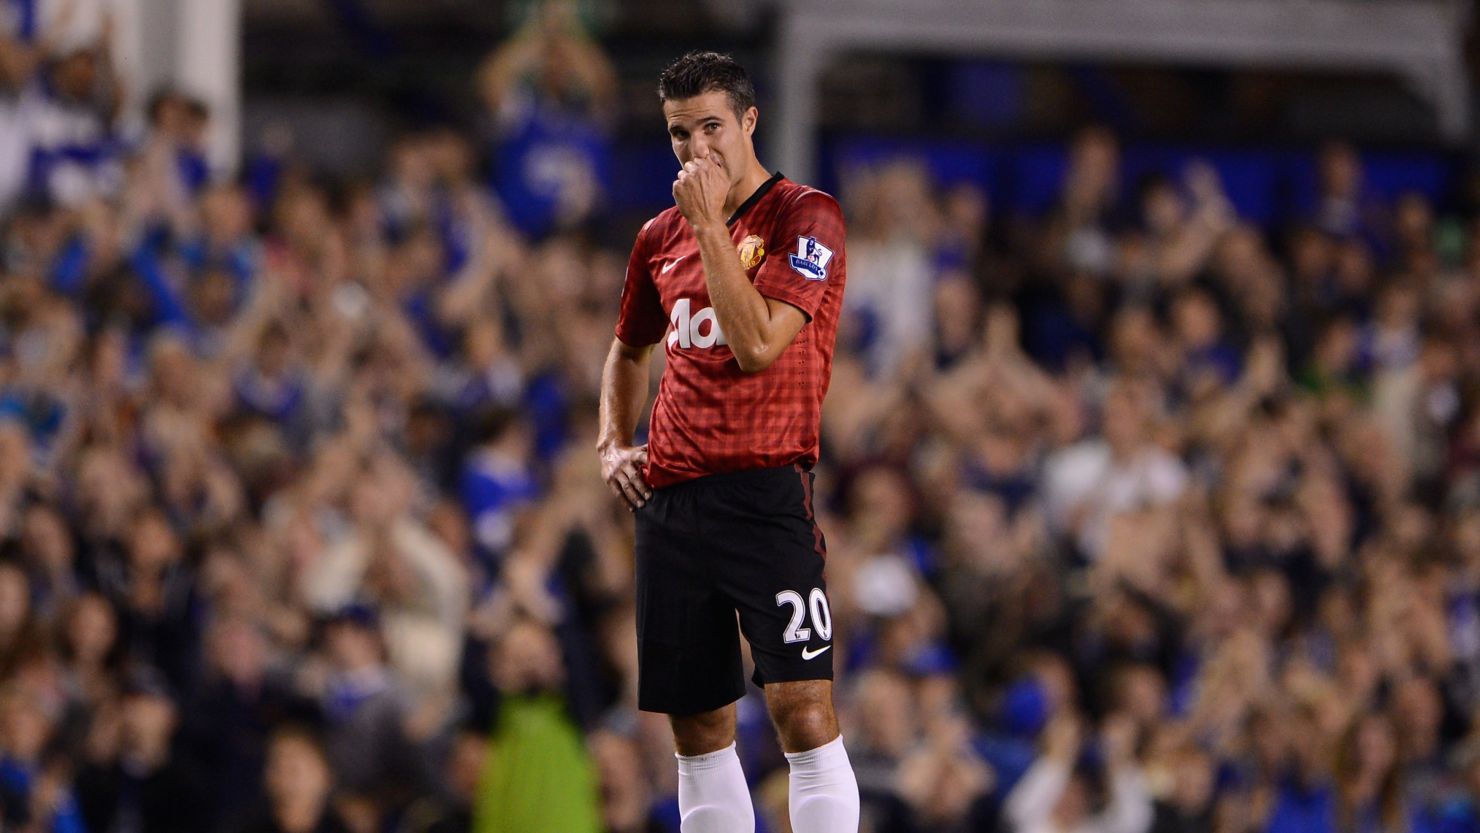 Robin Van Persie makes his debut as Manchester United lose 1-0 to Everton in their opening English Premier League game